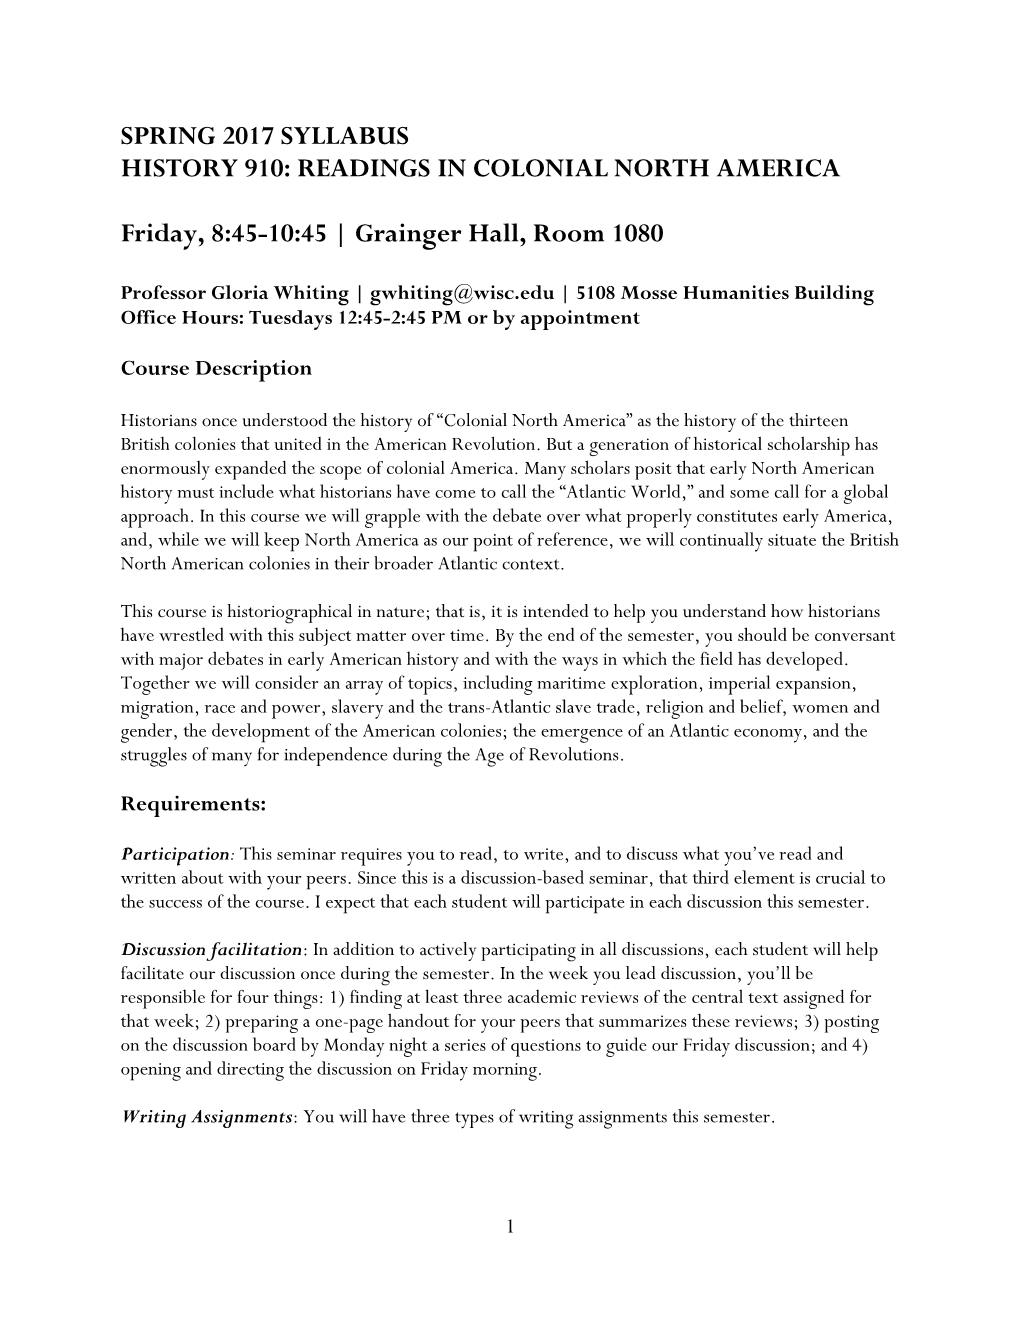 Spring 2017 Syllabus History 910: Readings in Colonial North America